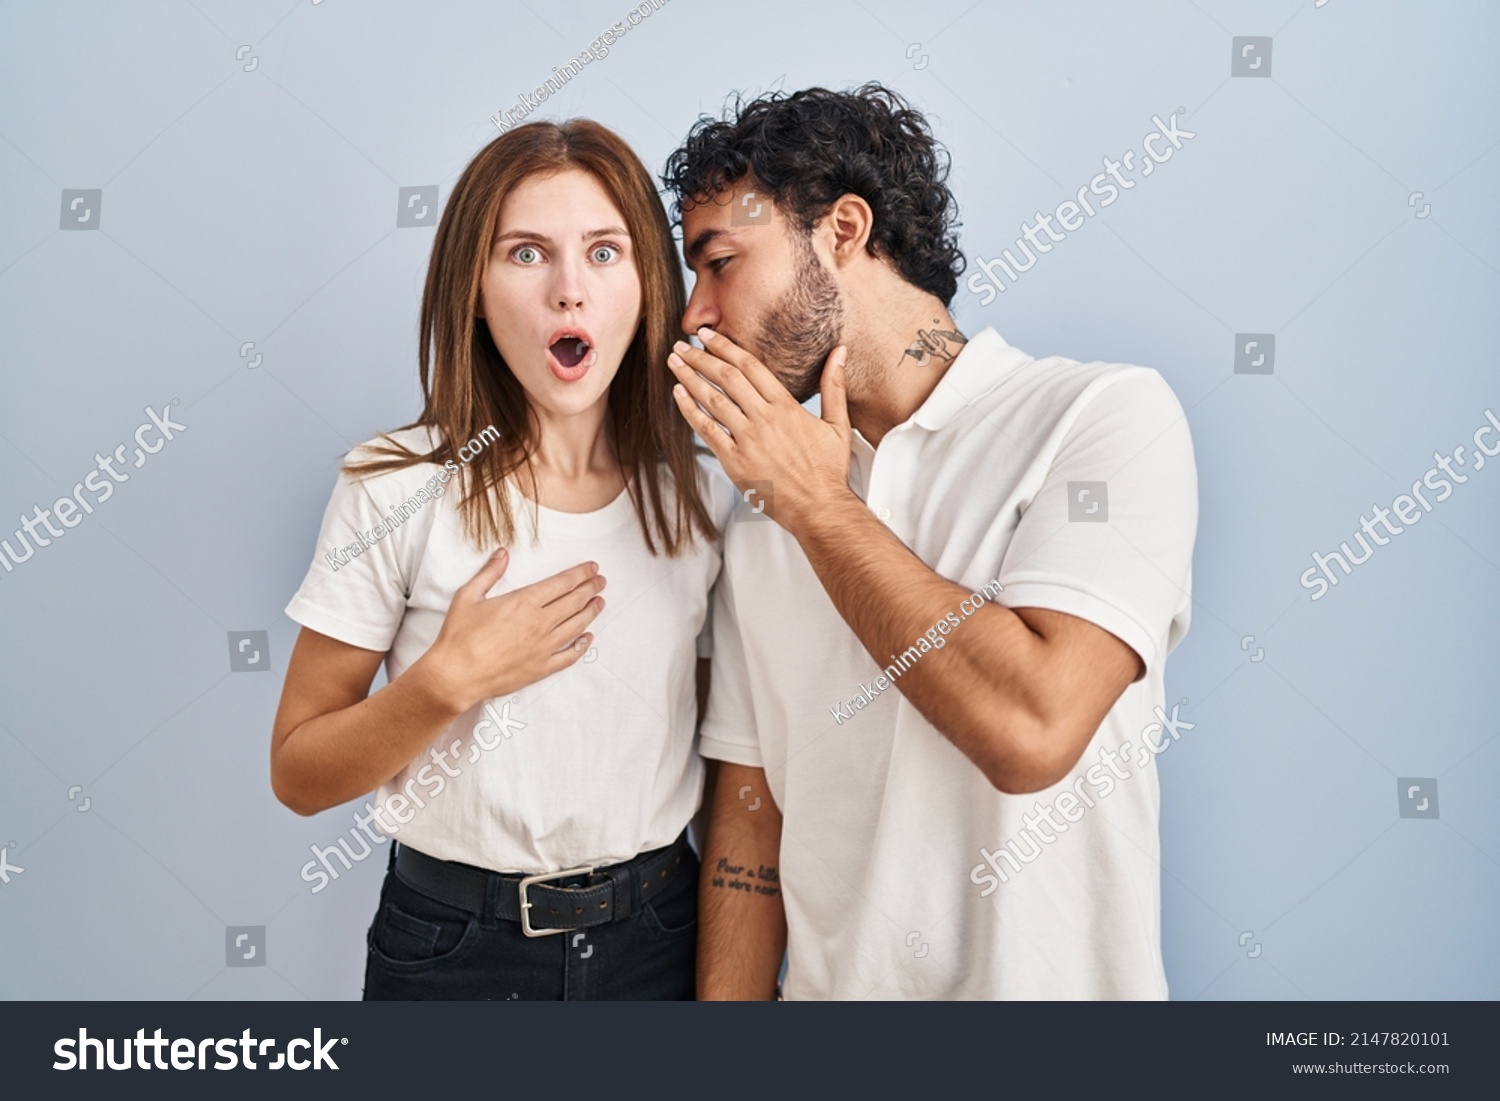 Young couple wearing casual clothes standing together hand on mouth telling secret rumor, whispering malicious talk conversation  #2147820101